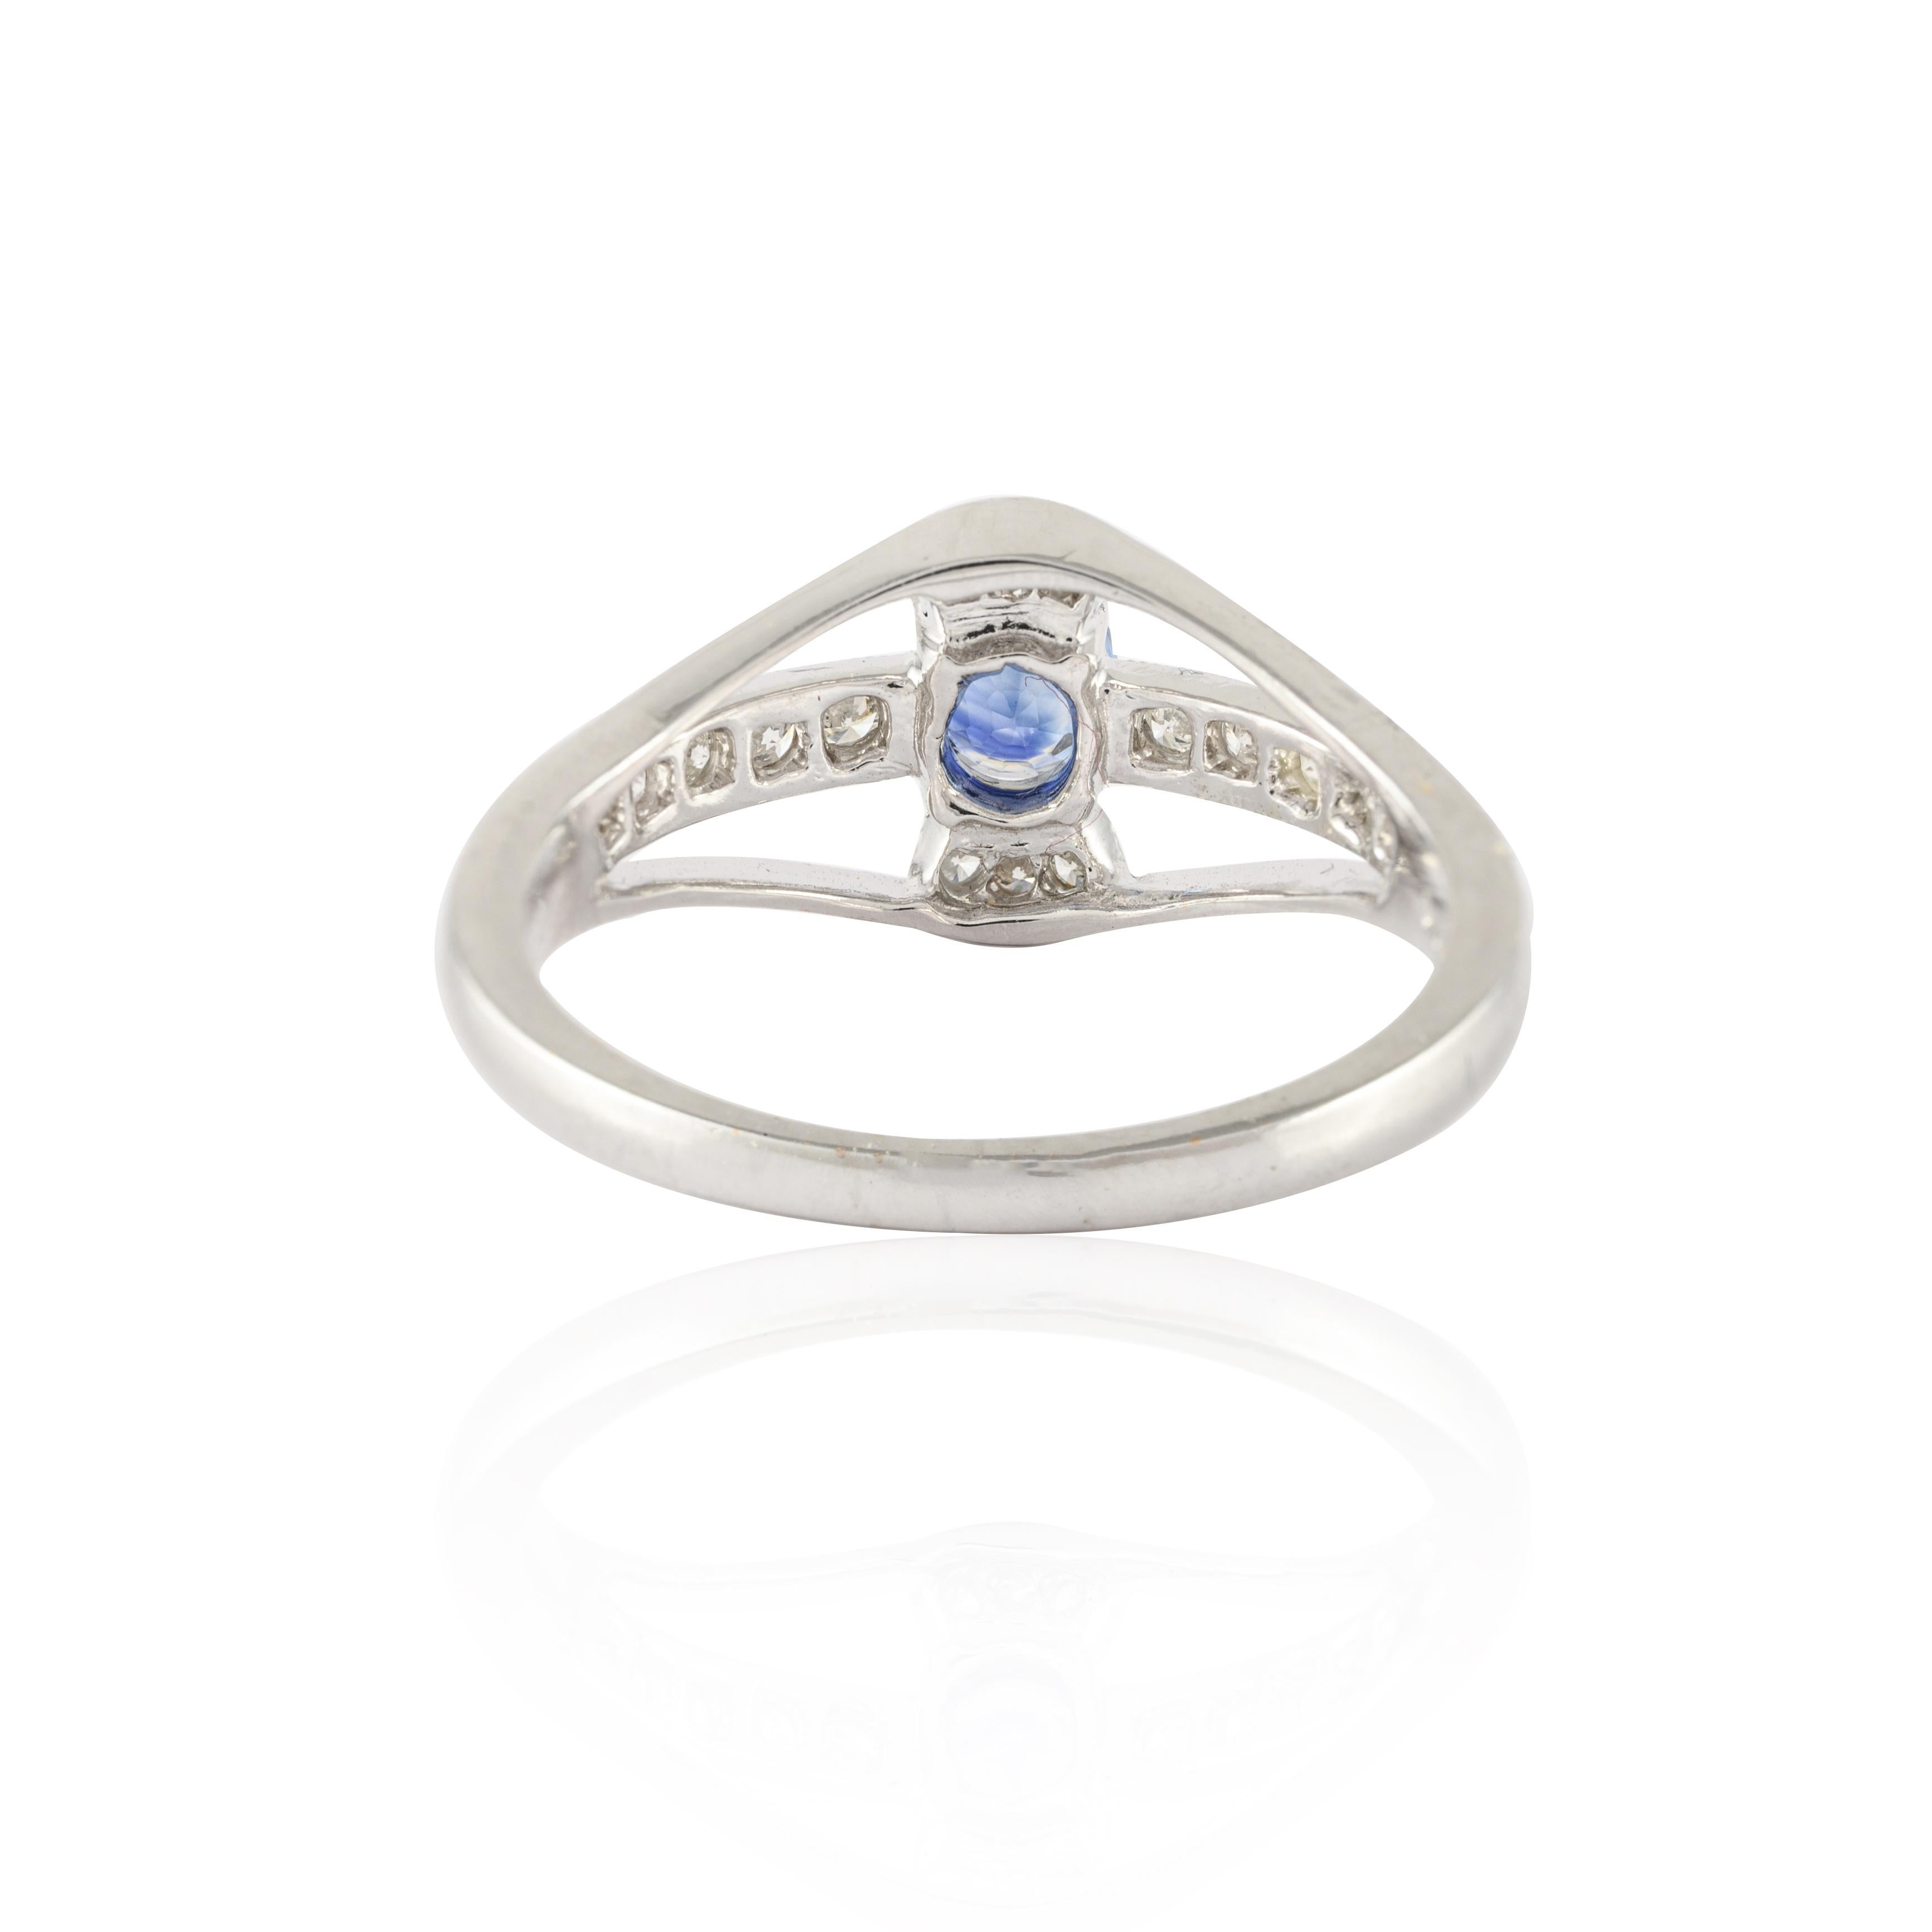 For Sale:  Elegant Diamond and Blue Sapphire Ring in 14k Solid White Gold  7